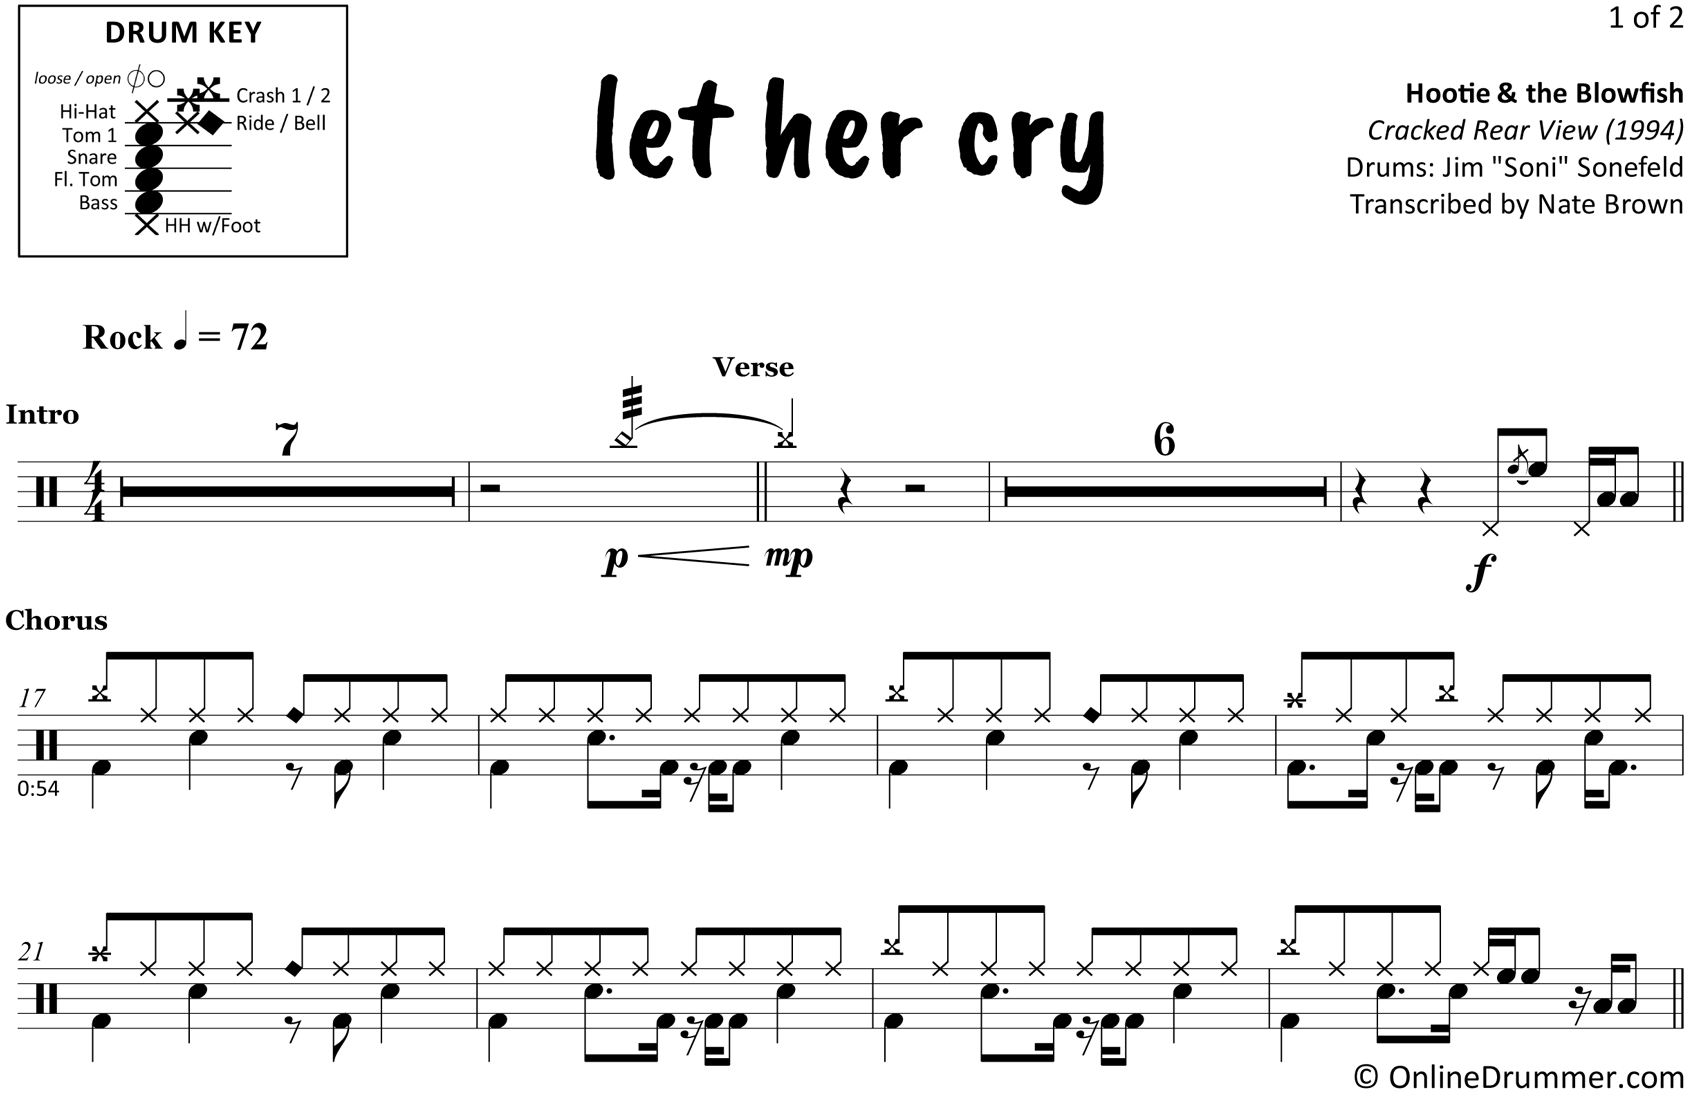 Let Her Cry - Hootie & the Blowfish - Drum Sheet Music